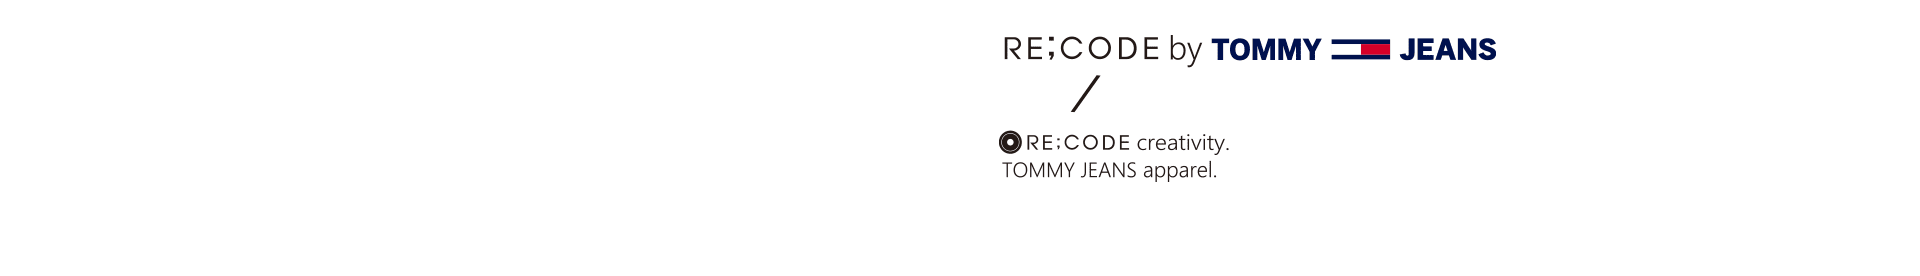 RE;CODE BY TOMMY JEANS / RE;CODE creativity. TOMMY JEANS apparel.